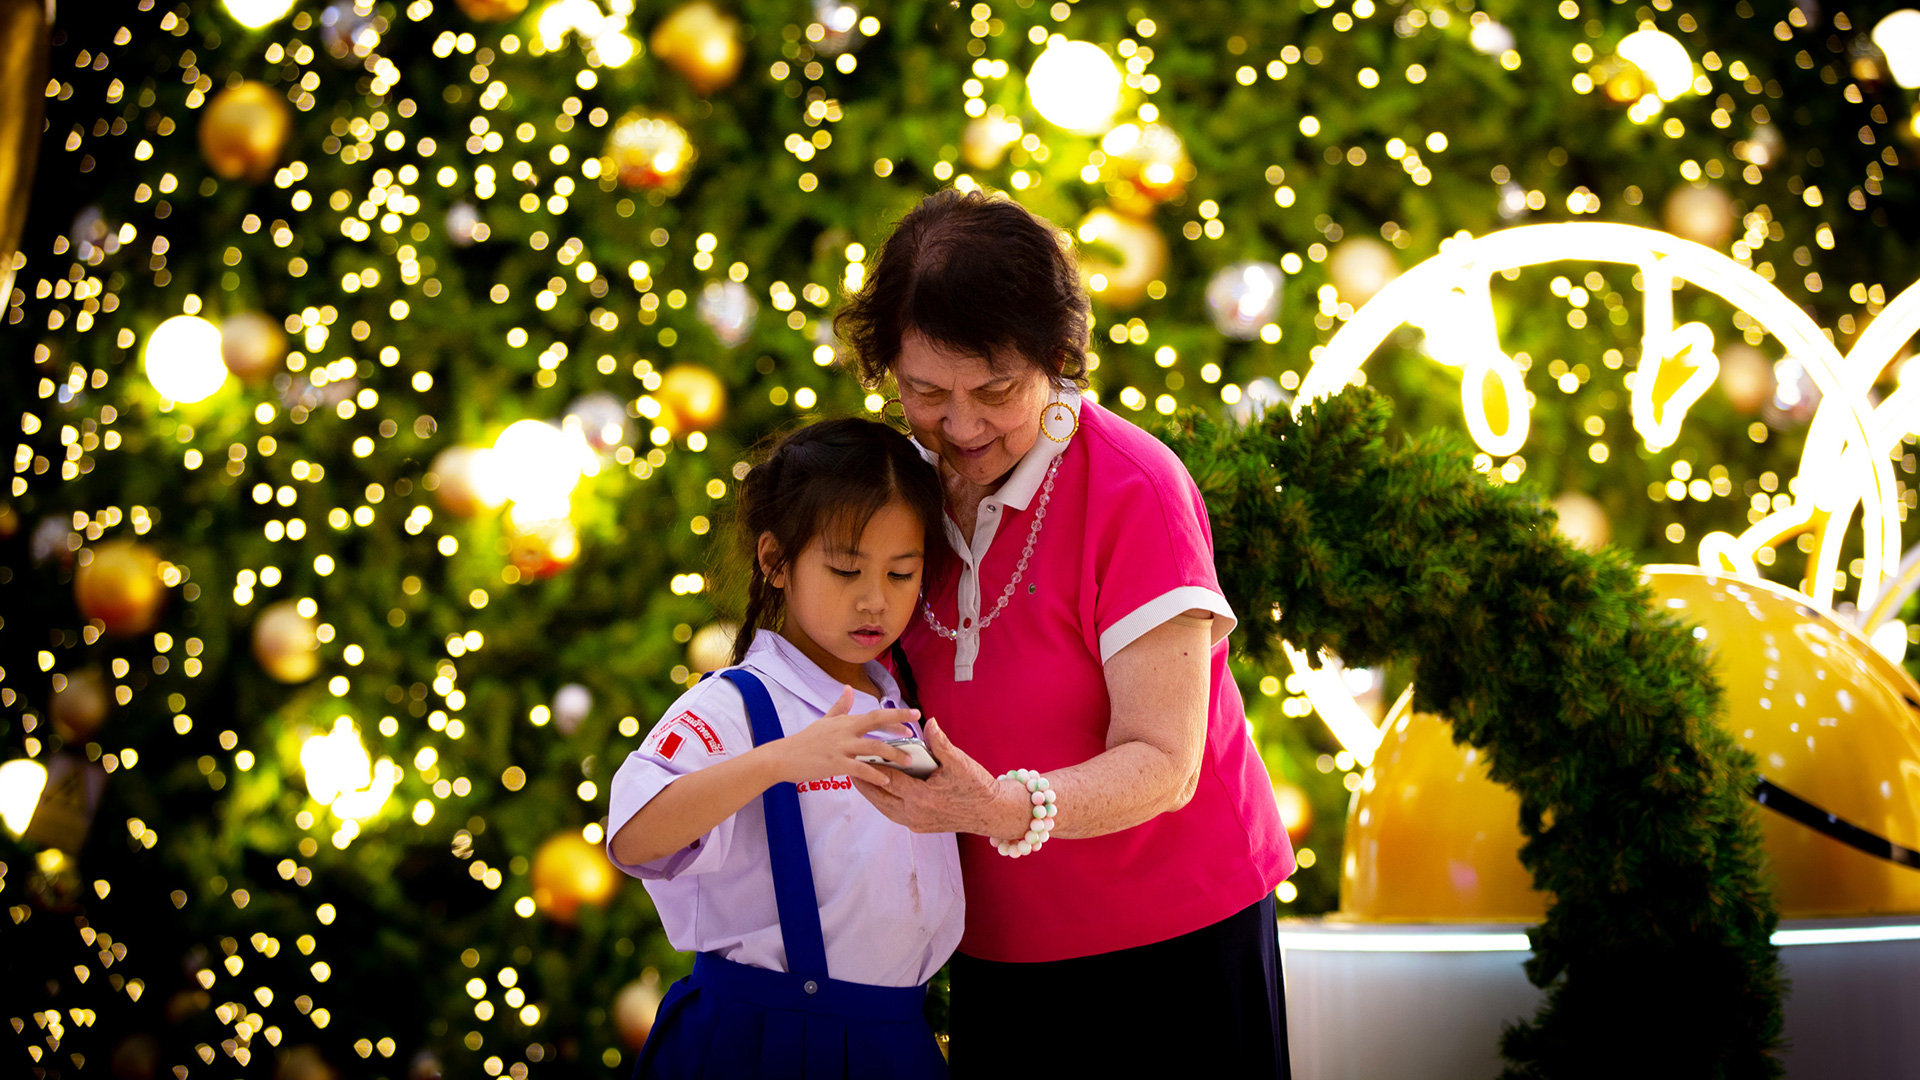 In Southeast Asia, a grandmother shares a precious moment with her granddaughter at a mall where the two posed for a picture. 